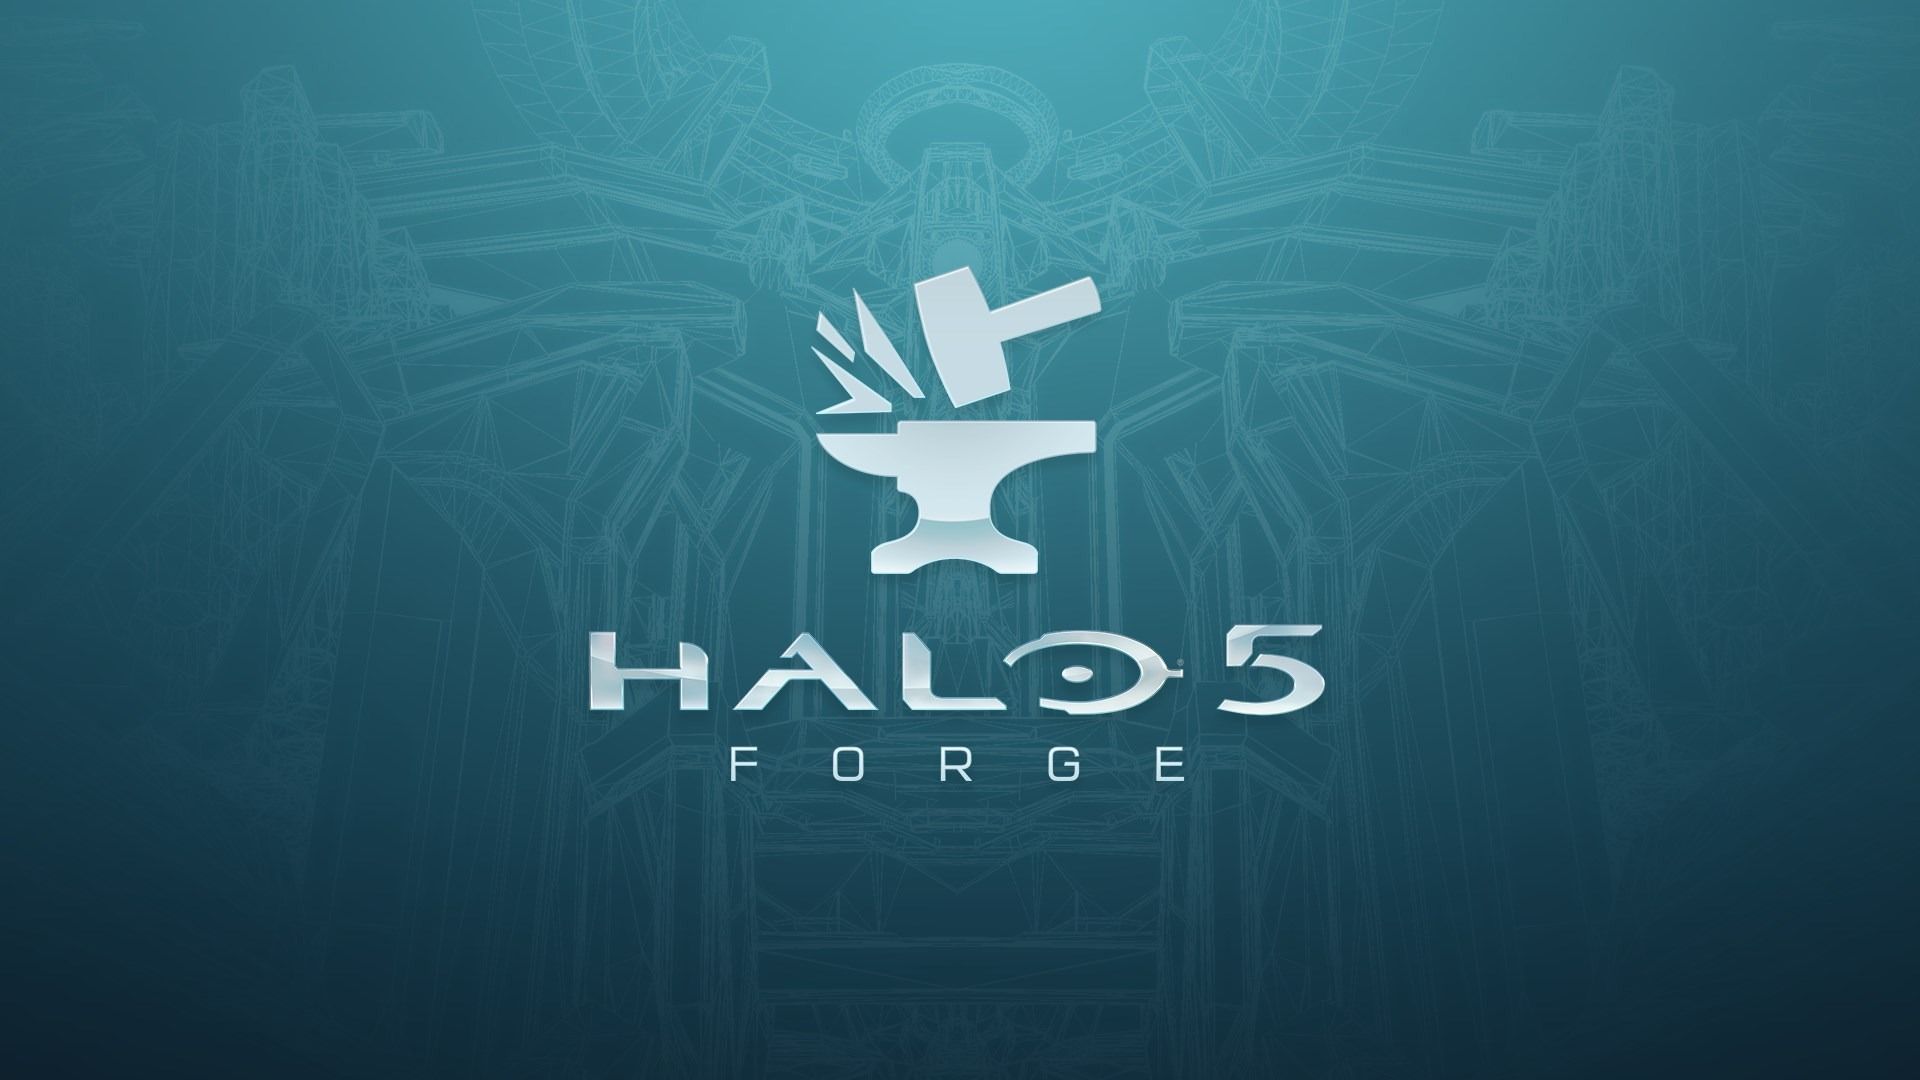 Guardians of Halo 5: Forge